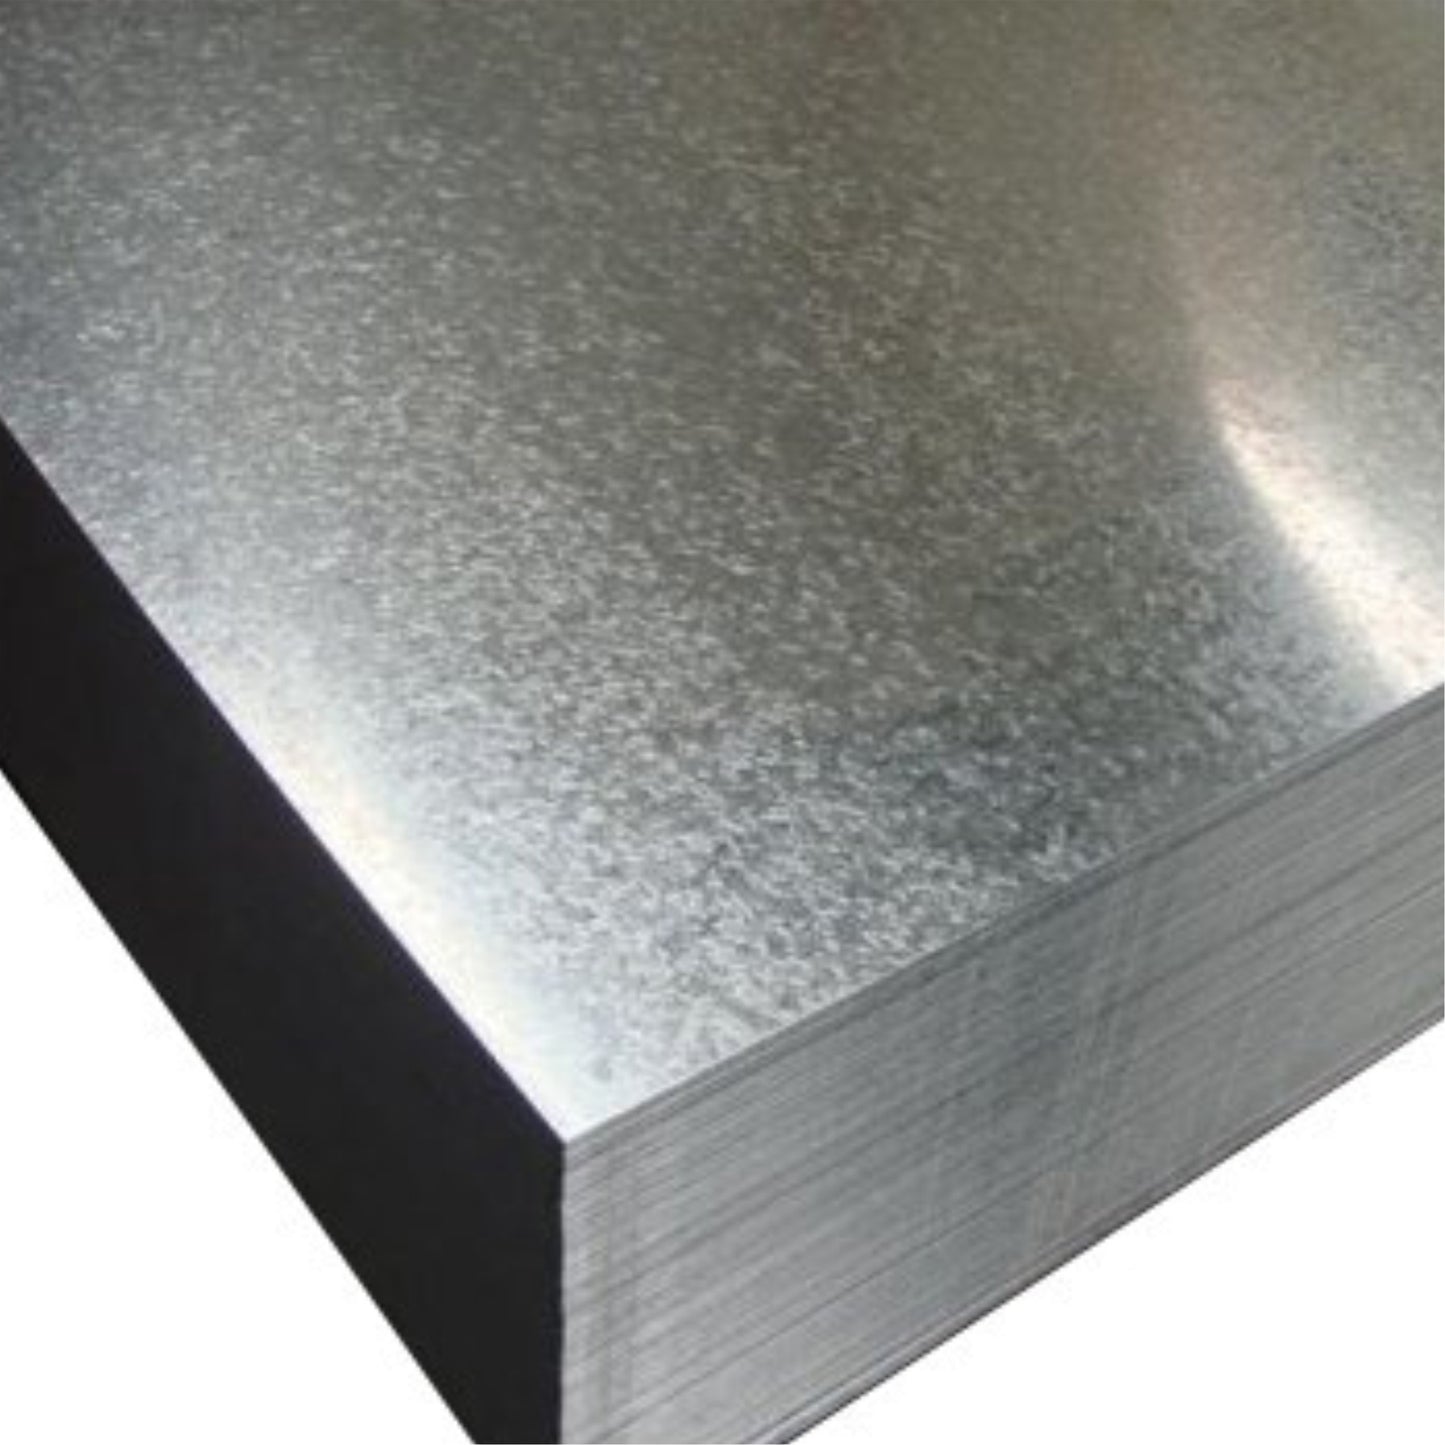 0.8mm GALVANISED SHEETS 2450x1225